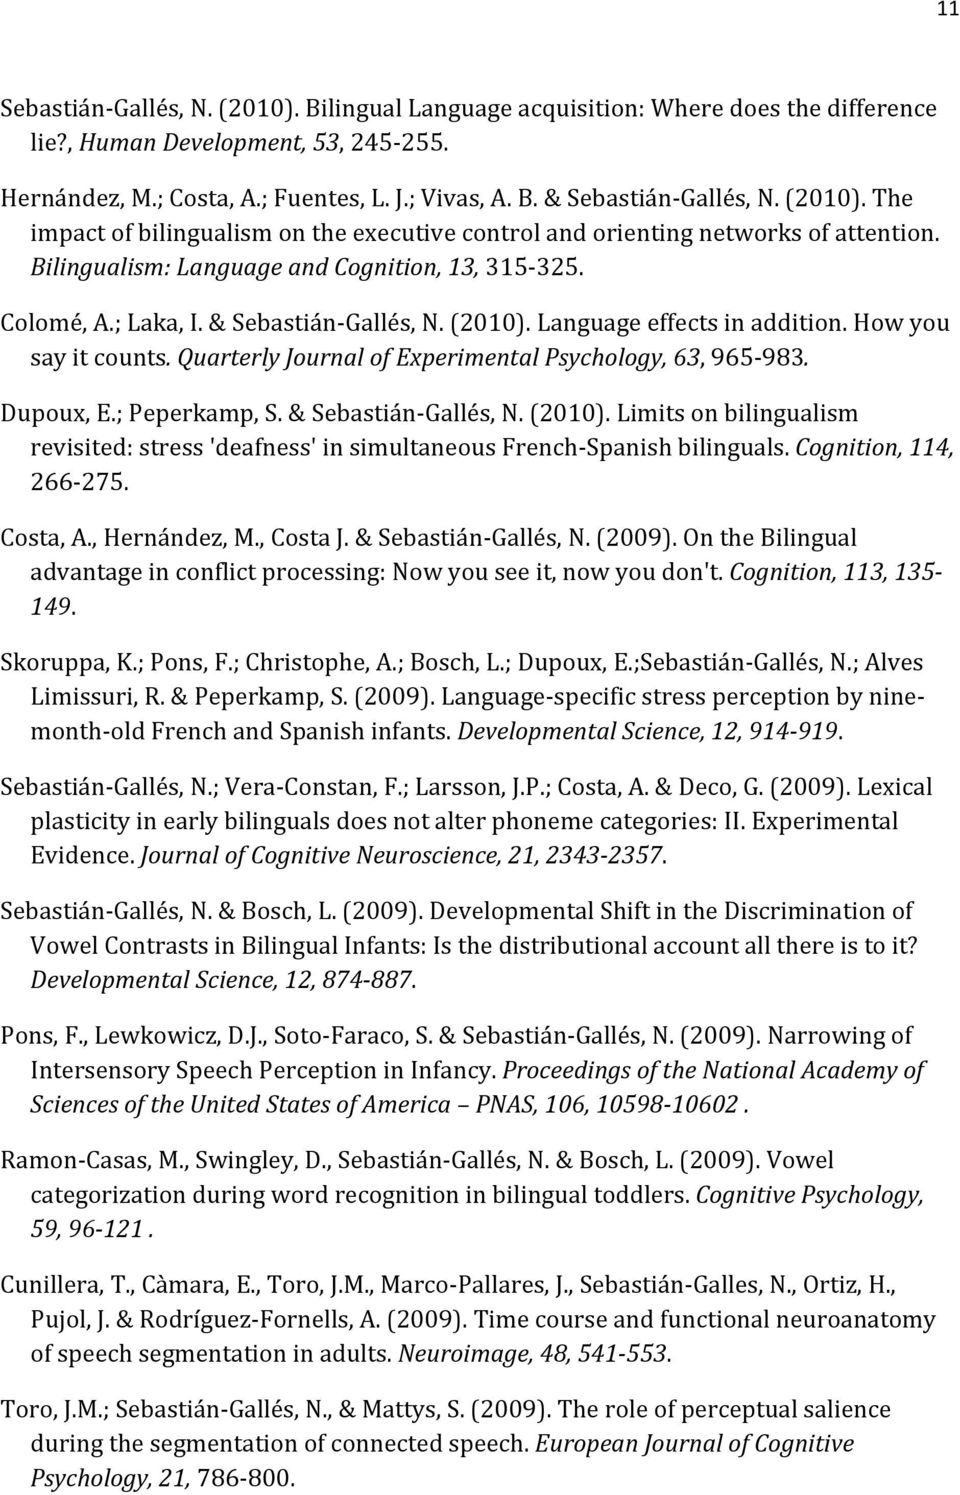 ;Peperkamp,S.&SebastiánSGallés,N.(2010).Limitsonbilingualism revisited:stress'deafness'insimultaneousfrenchsspanishbilinguals.cognition,114, 266S275. Costa,A.,Hernández,M.,CostaJ.&SebastiánSGallés,N.(2009).